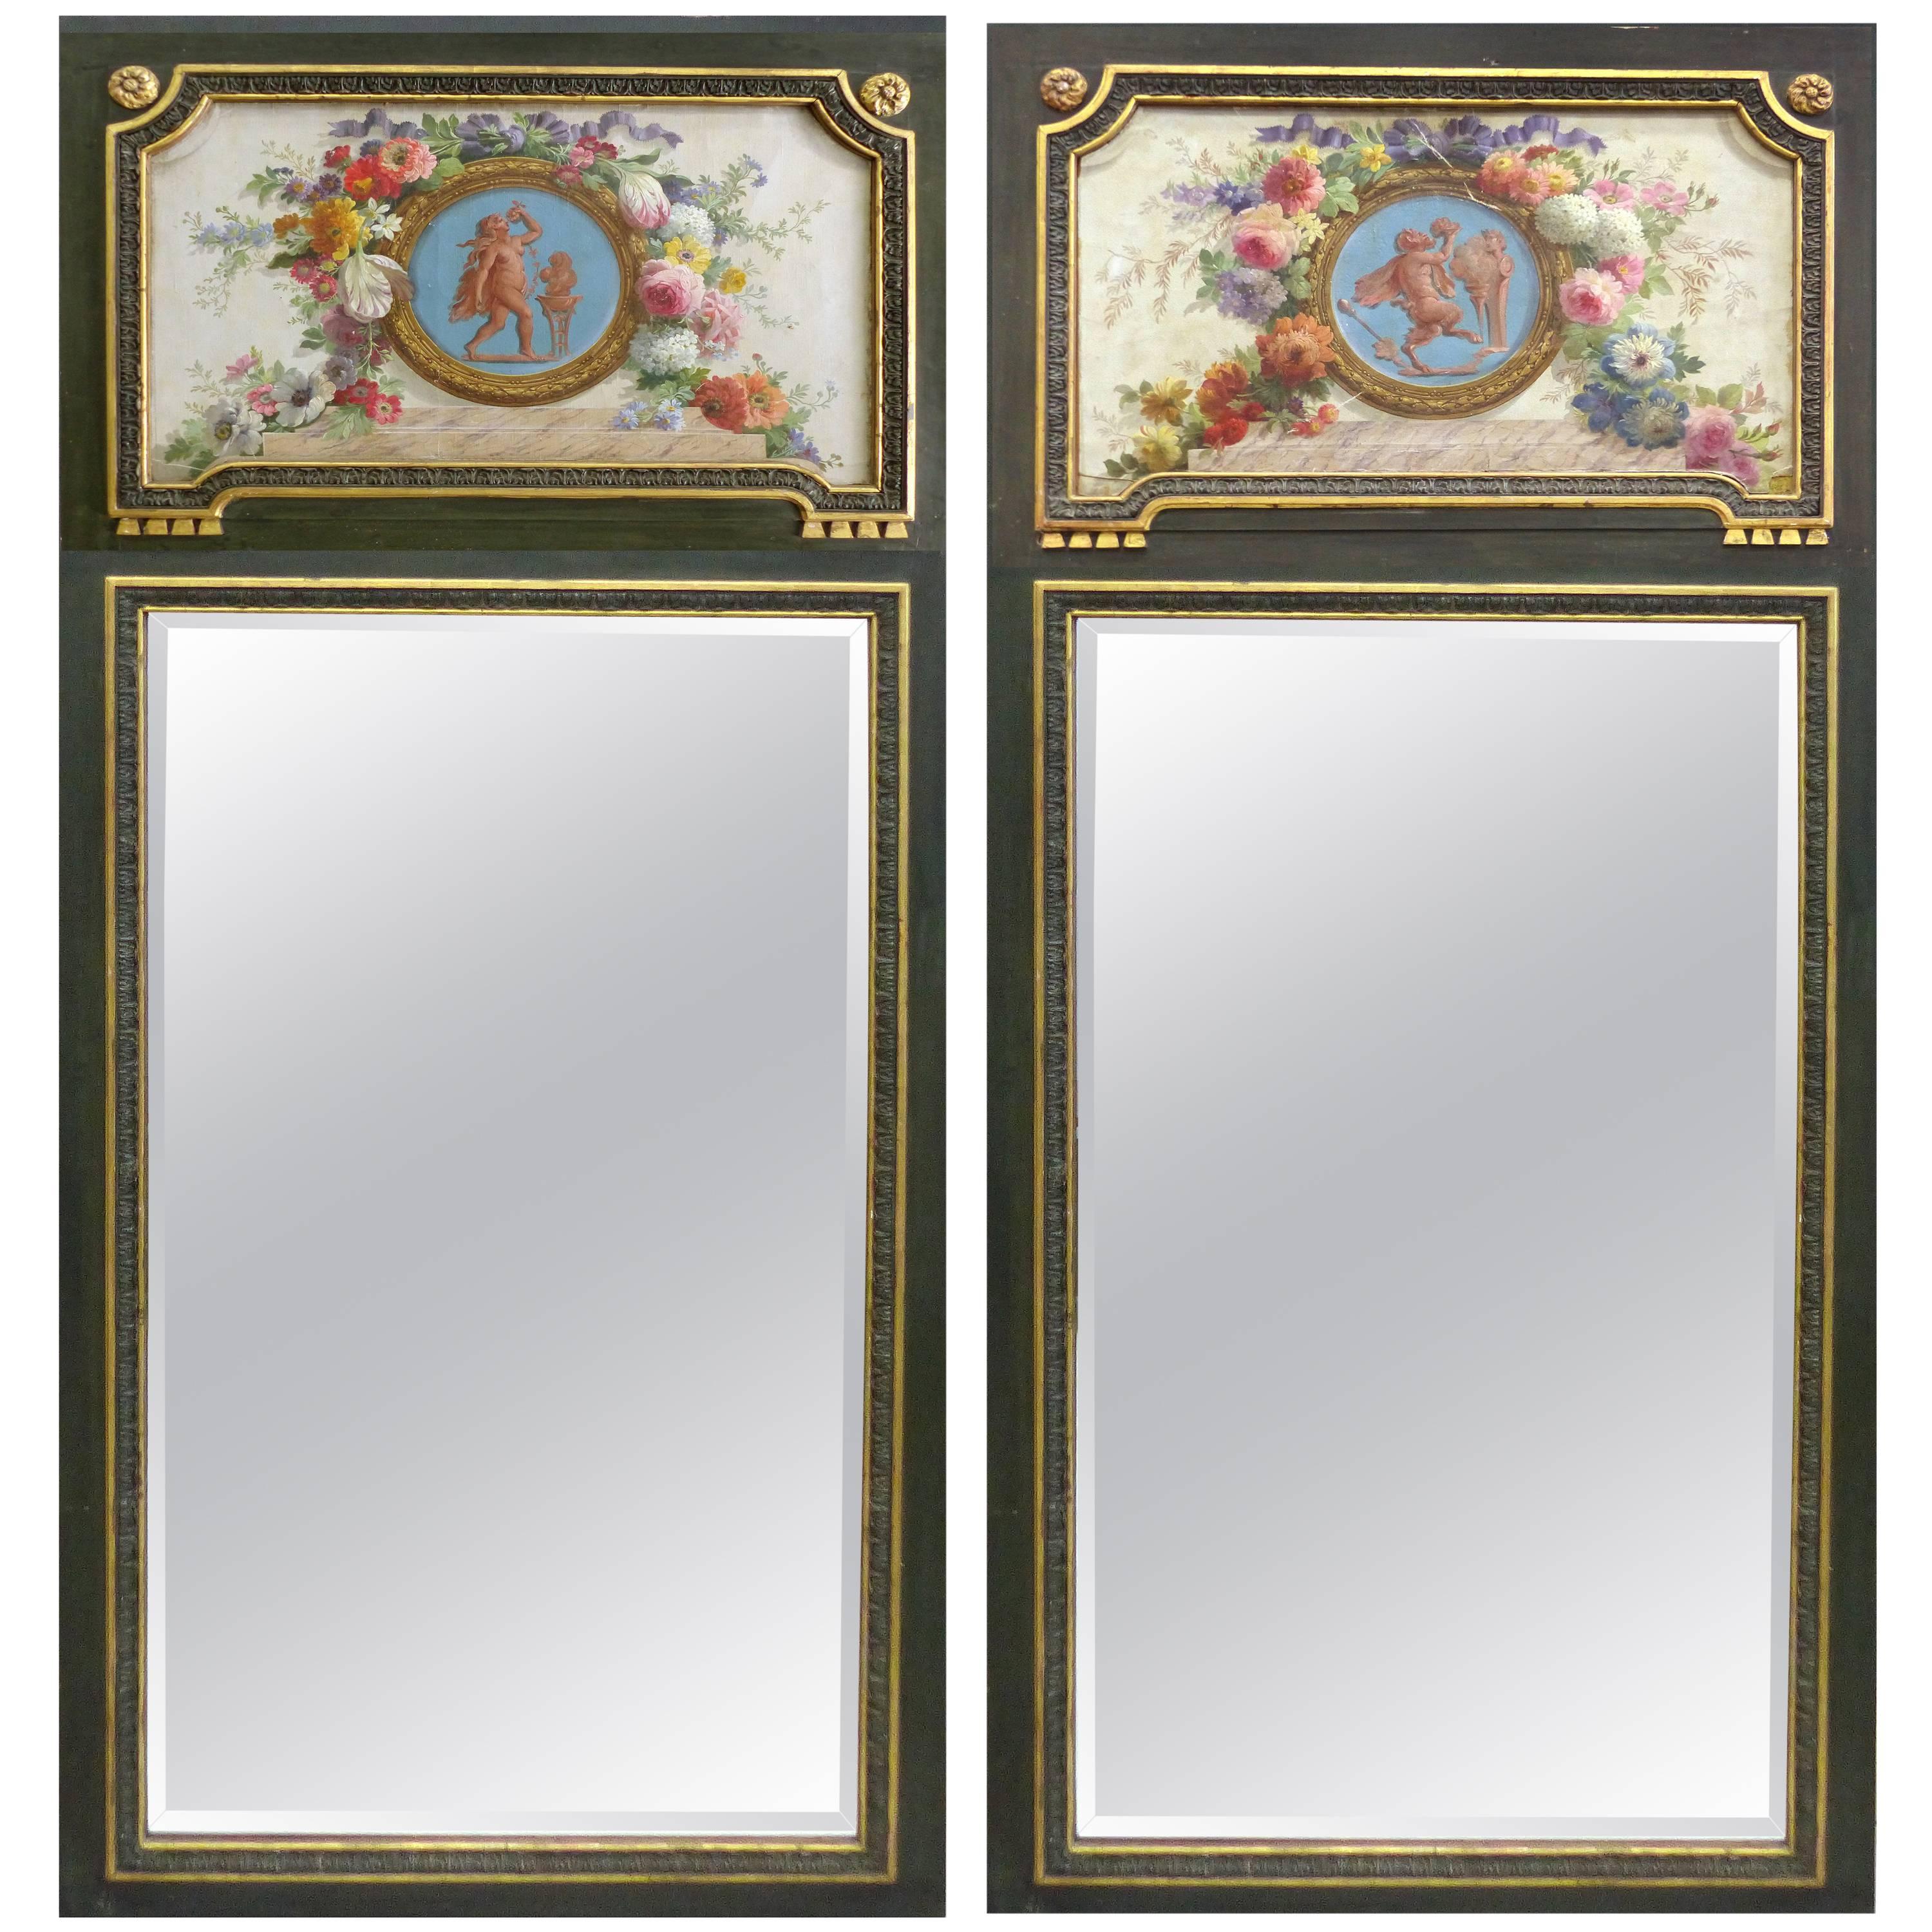 Monumental French Hand-Painted Trumeau Mirrors, Pair